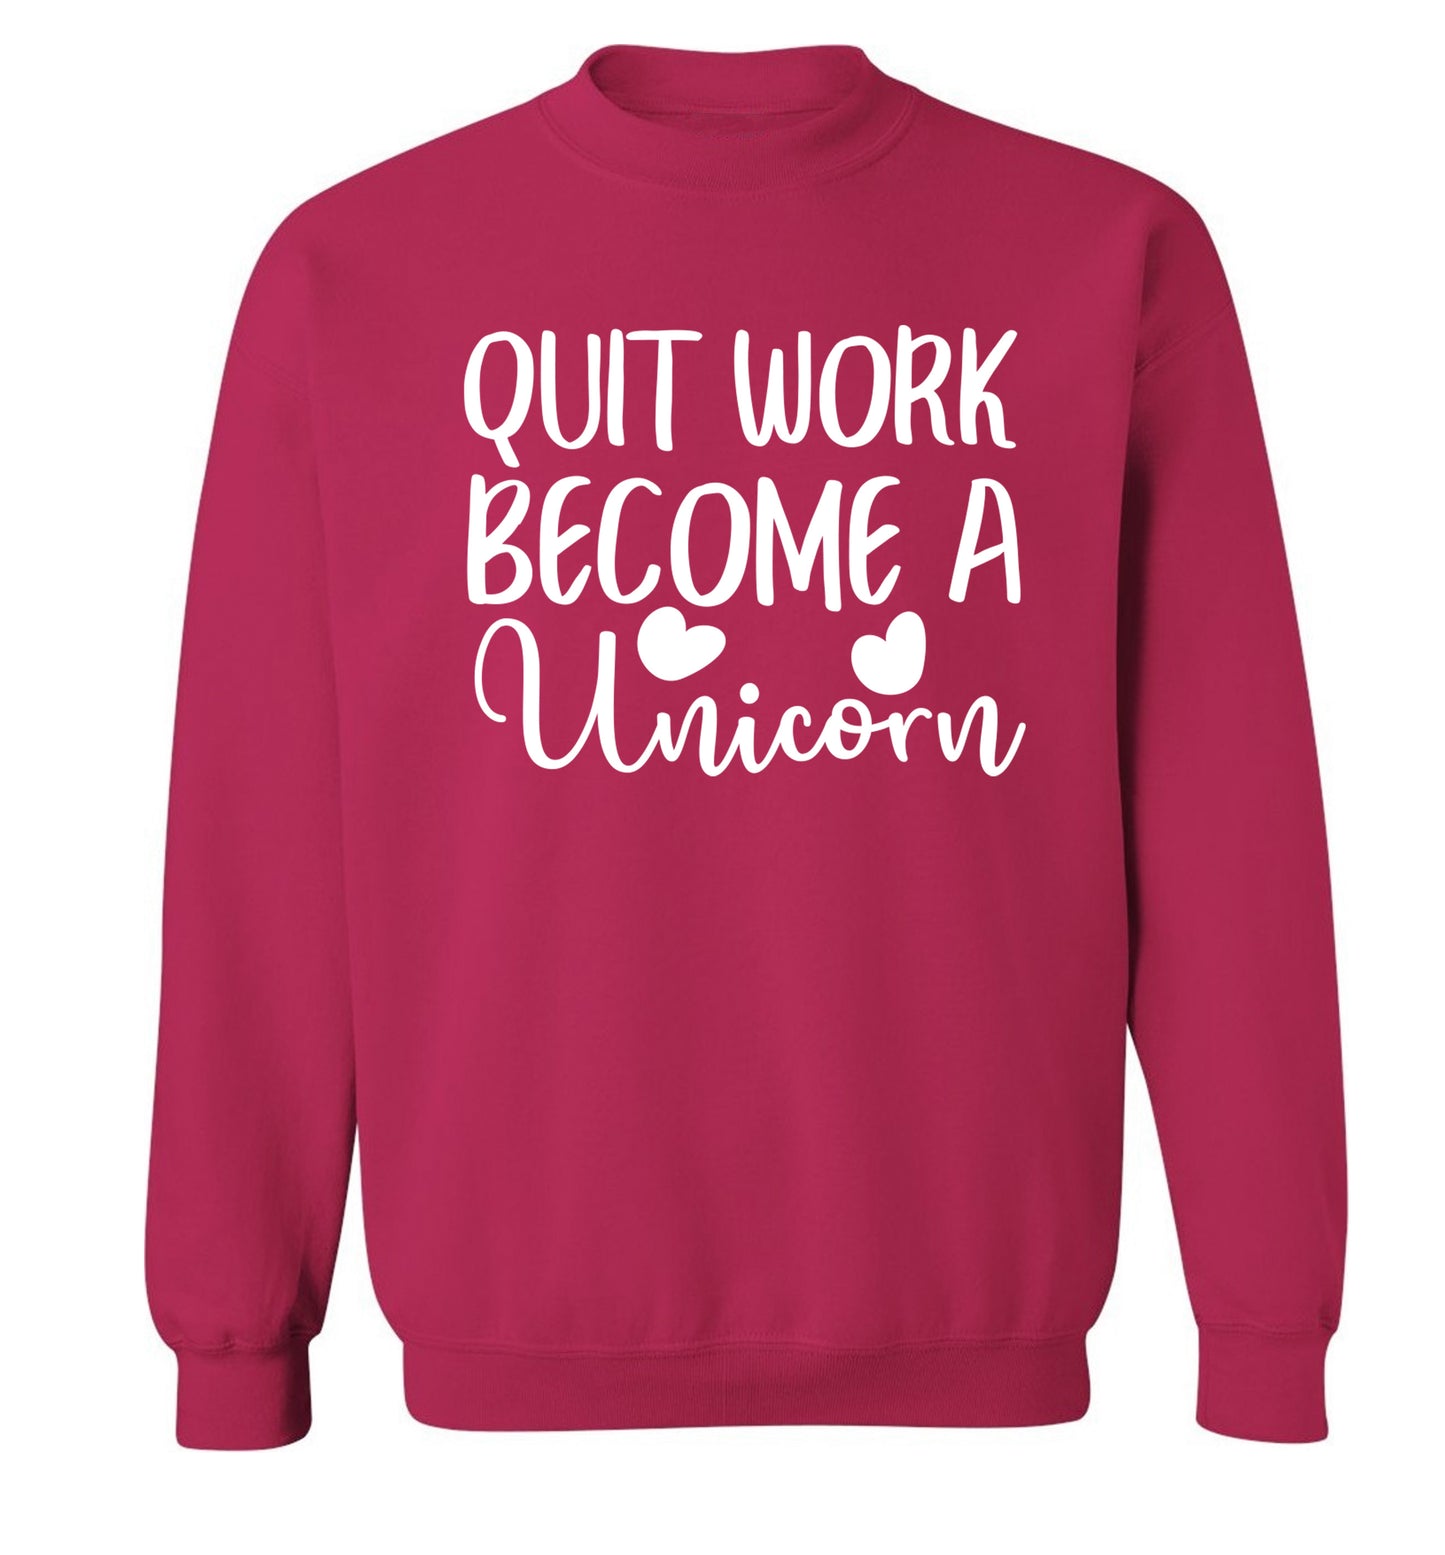 Quit work become a unicorn Adult's unisex pink Sweater 2XL